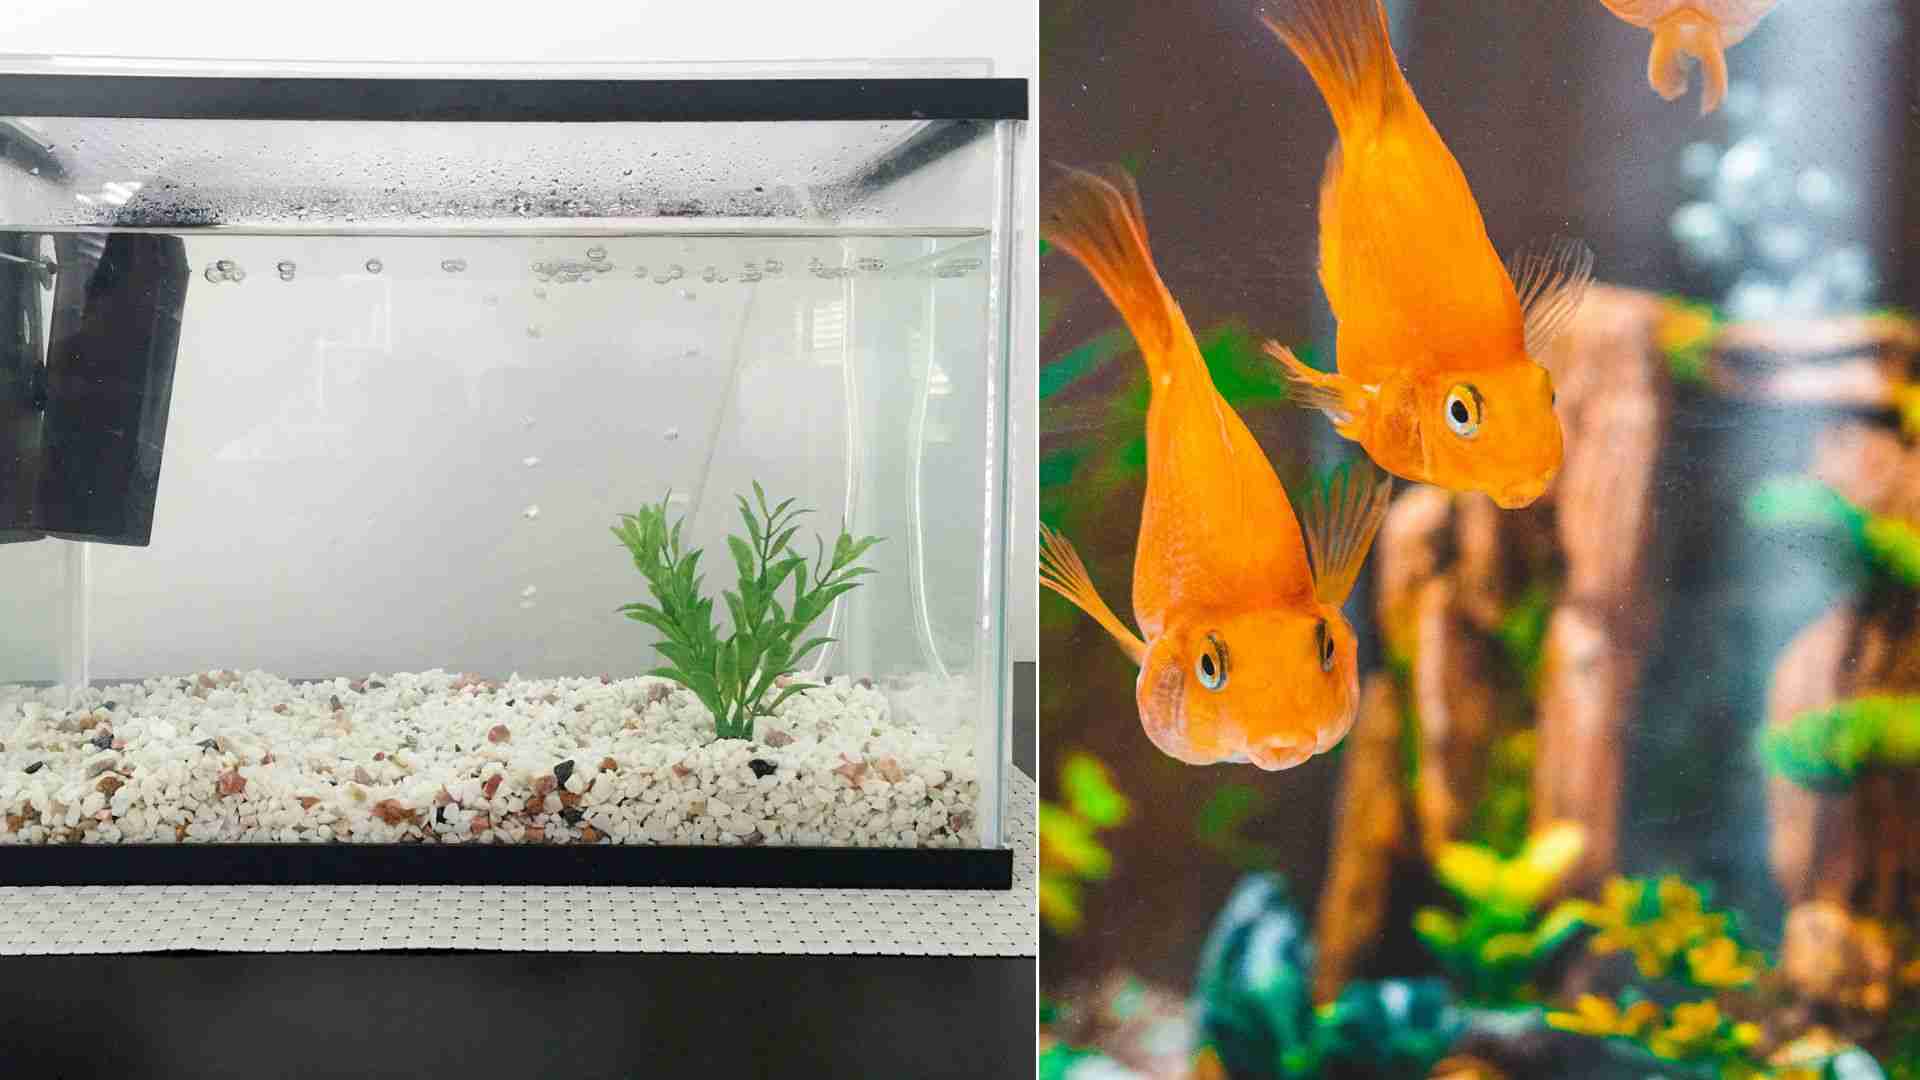 How to Change Aquarium Filter Without Losing Beneficial Bacteria